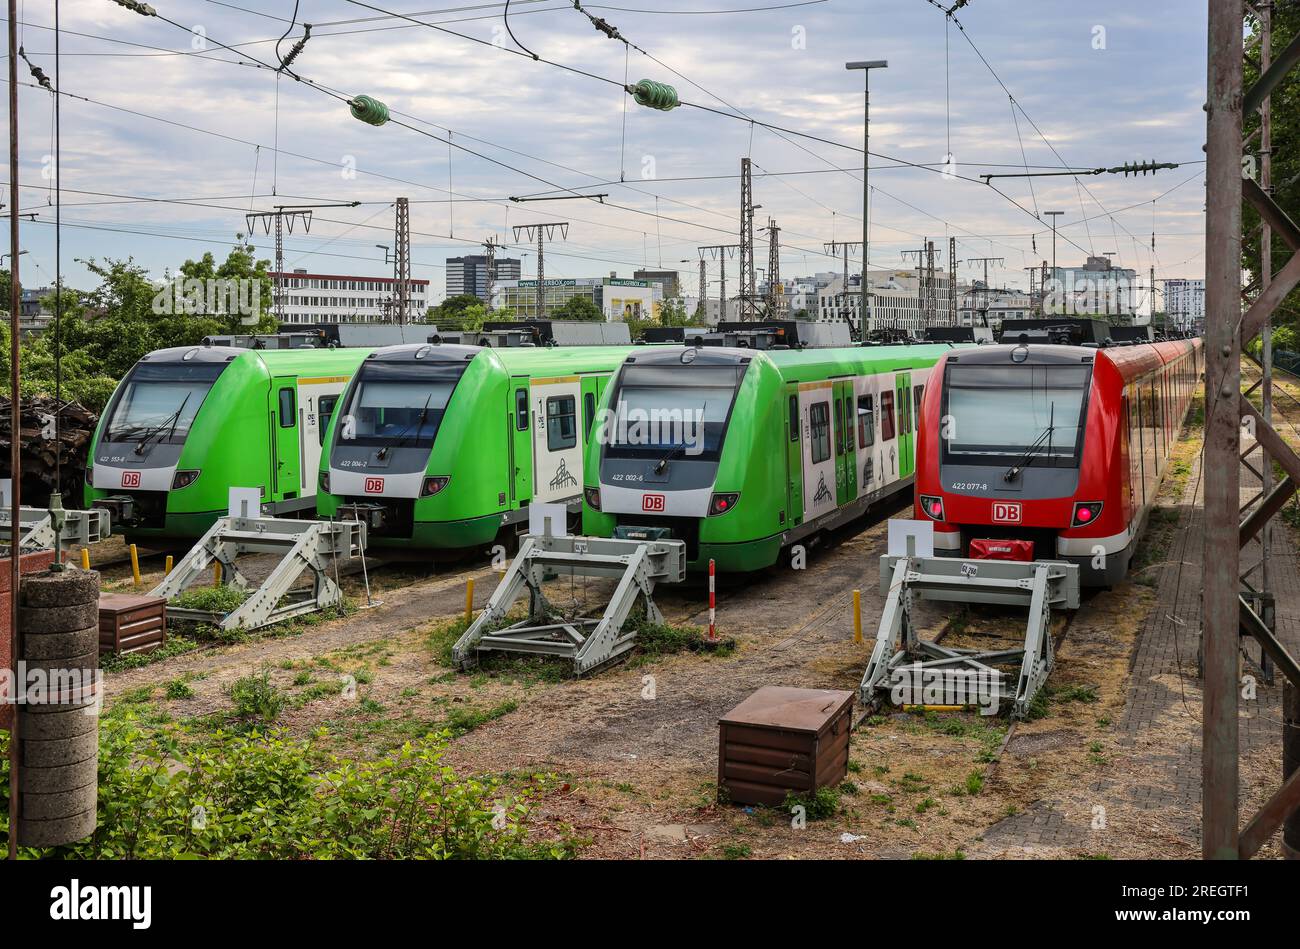 Essen, North Rhine-Westphalia, Germany - S-Bahn trains stand on a siding at the buffer stop at Essen main station. Stock Photo